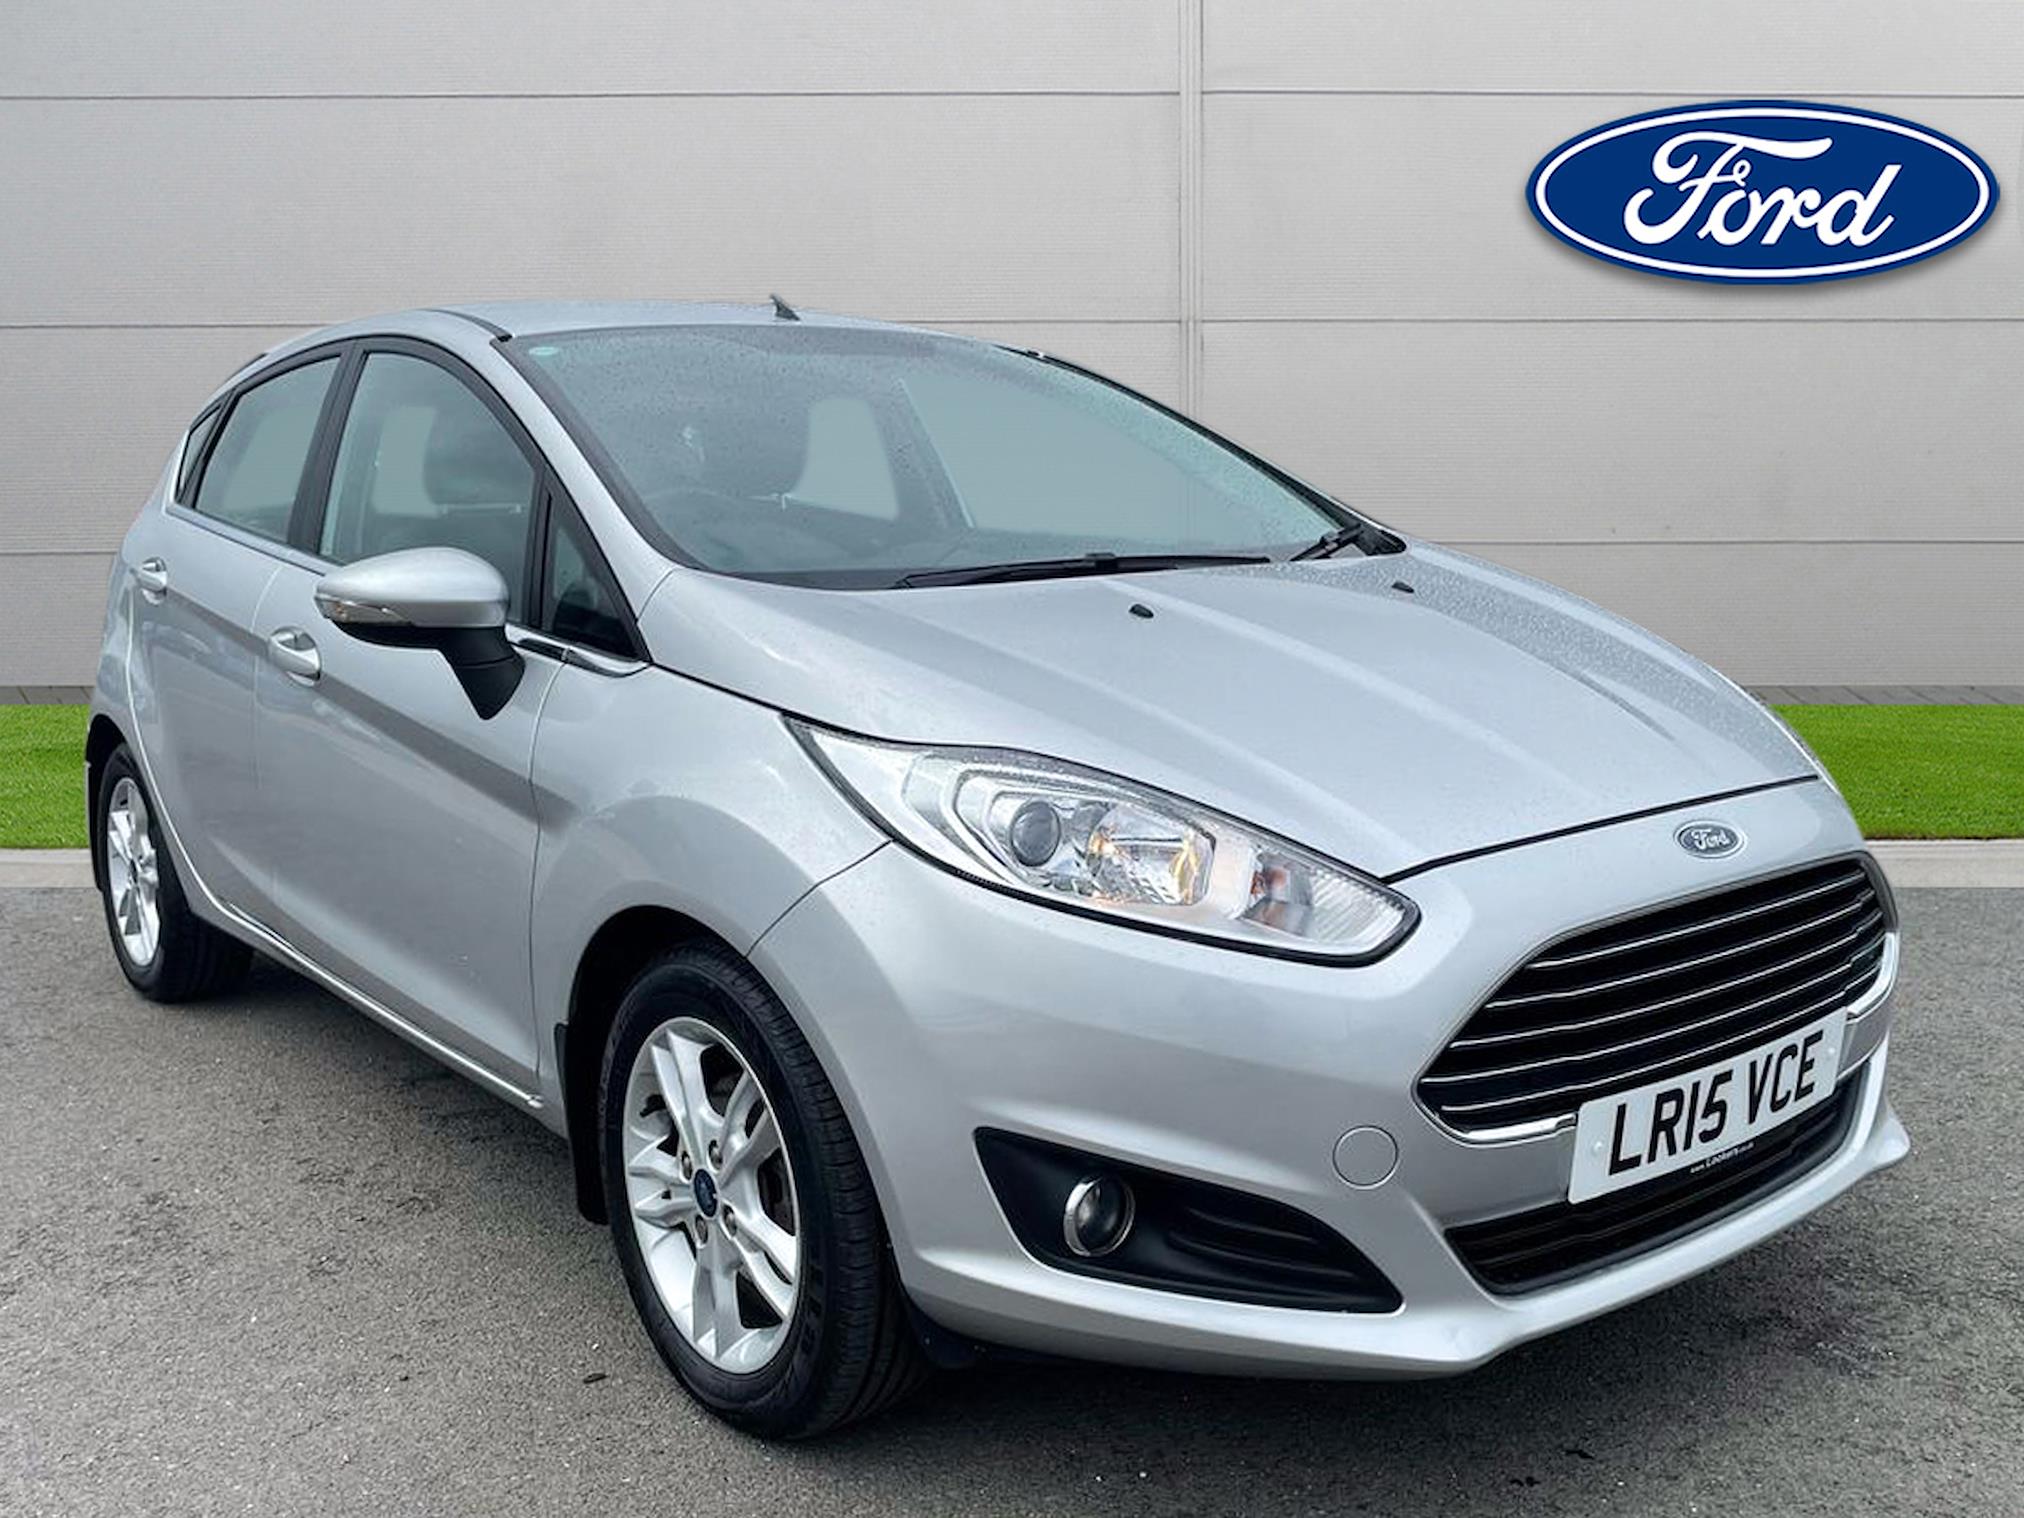 Used FORD FIESTA 1.0 Ecoboost Zetec 5Dr 2015